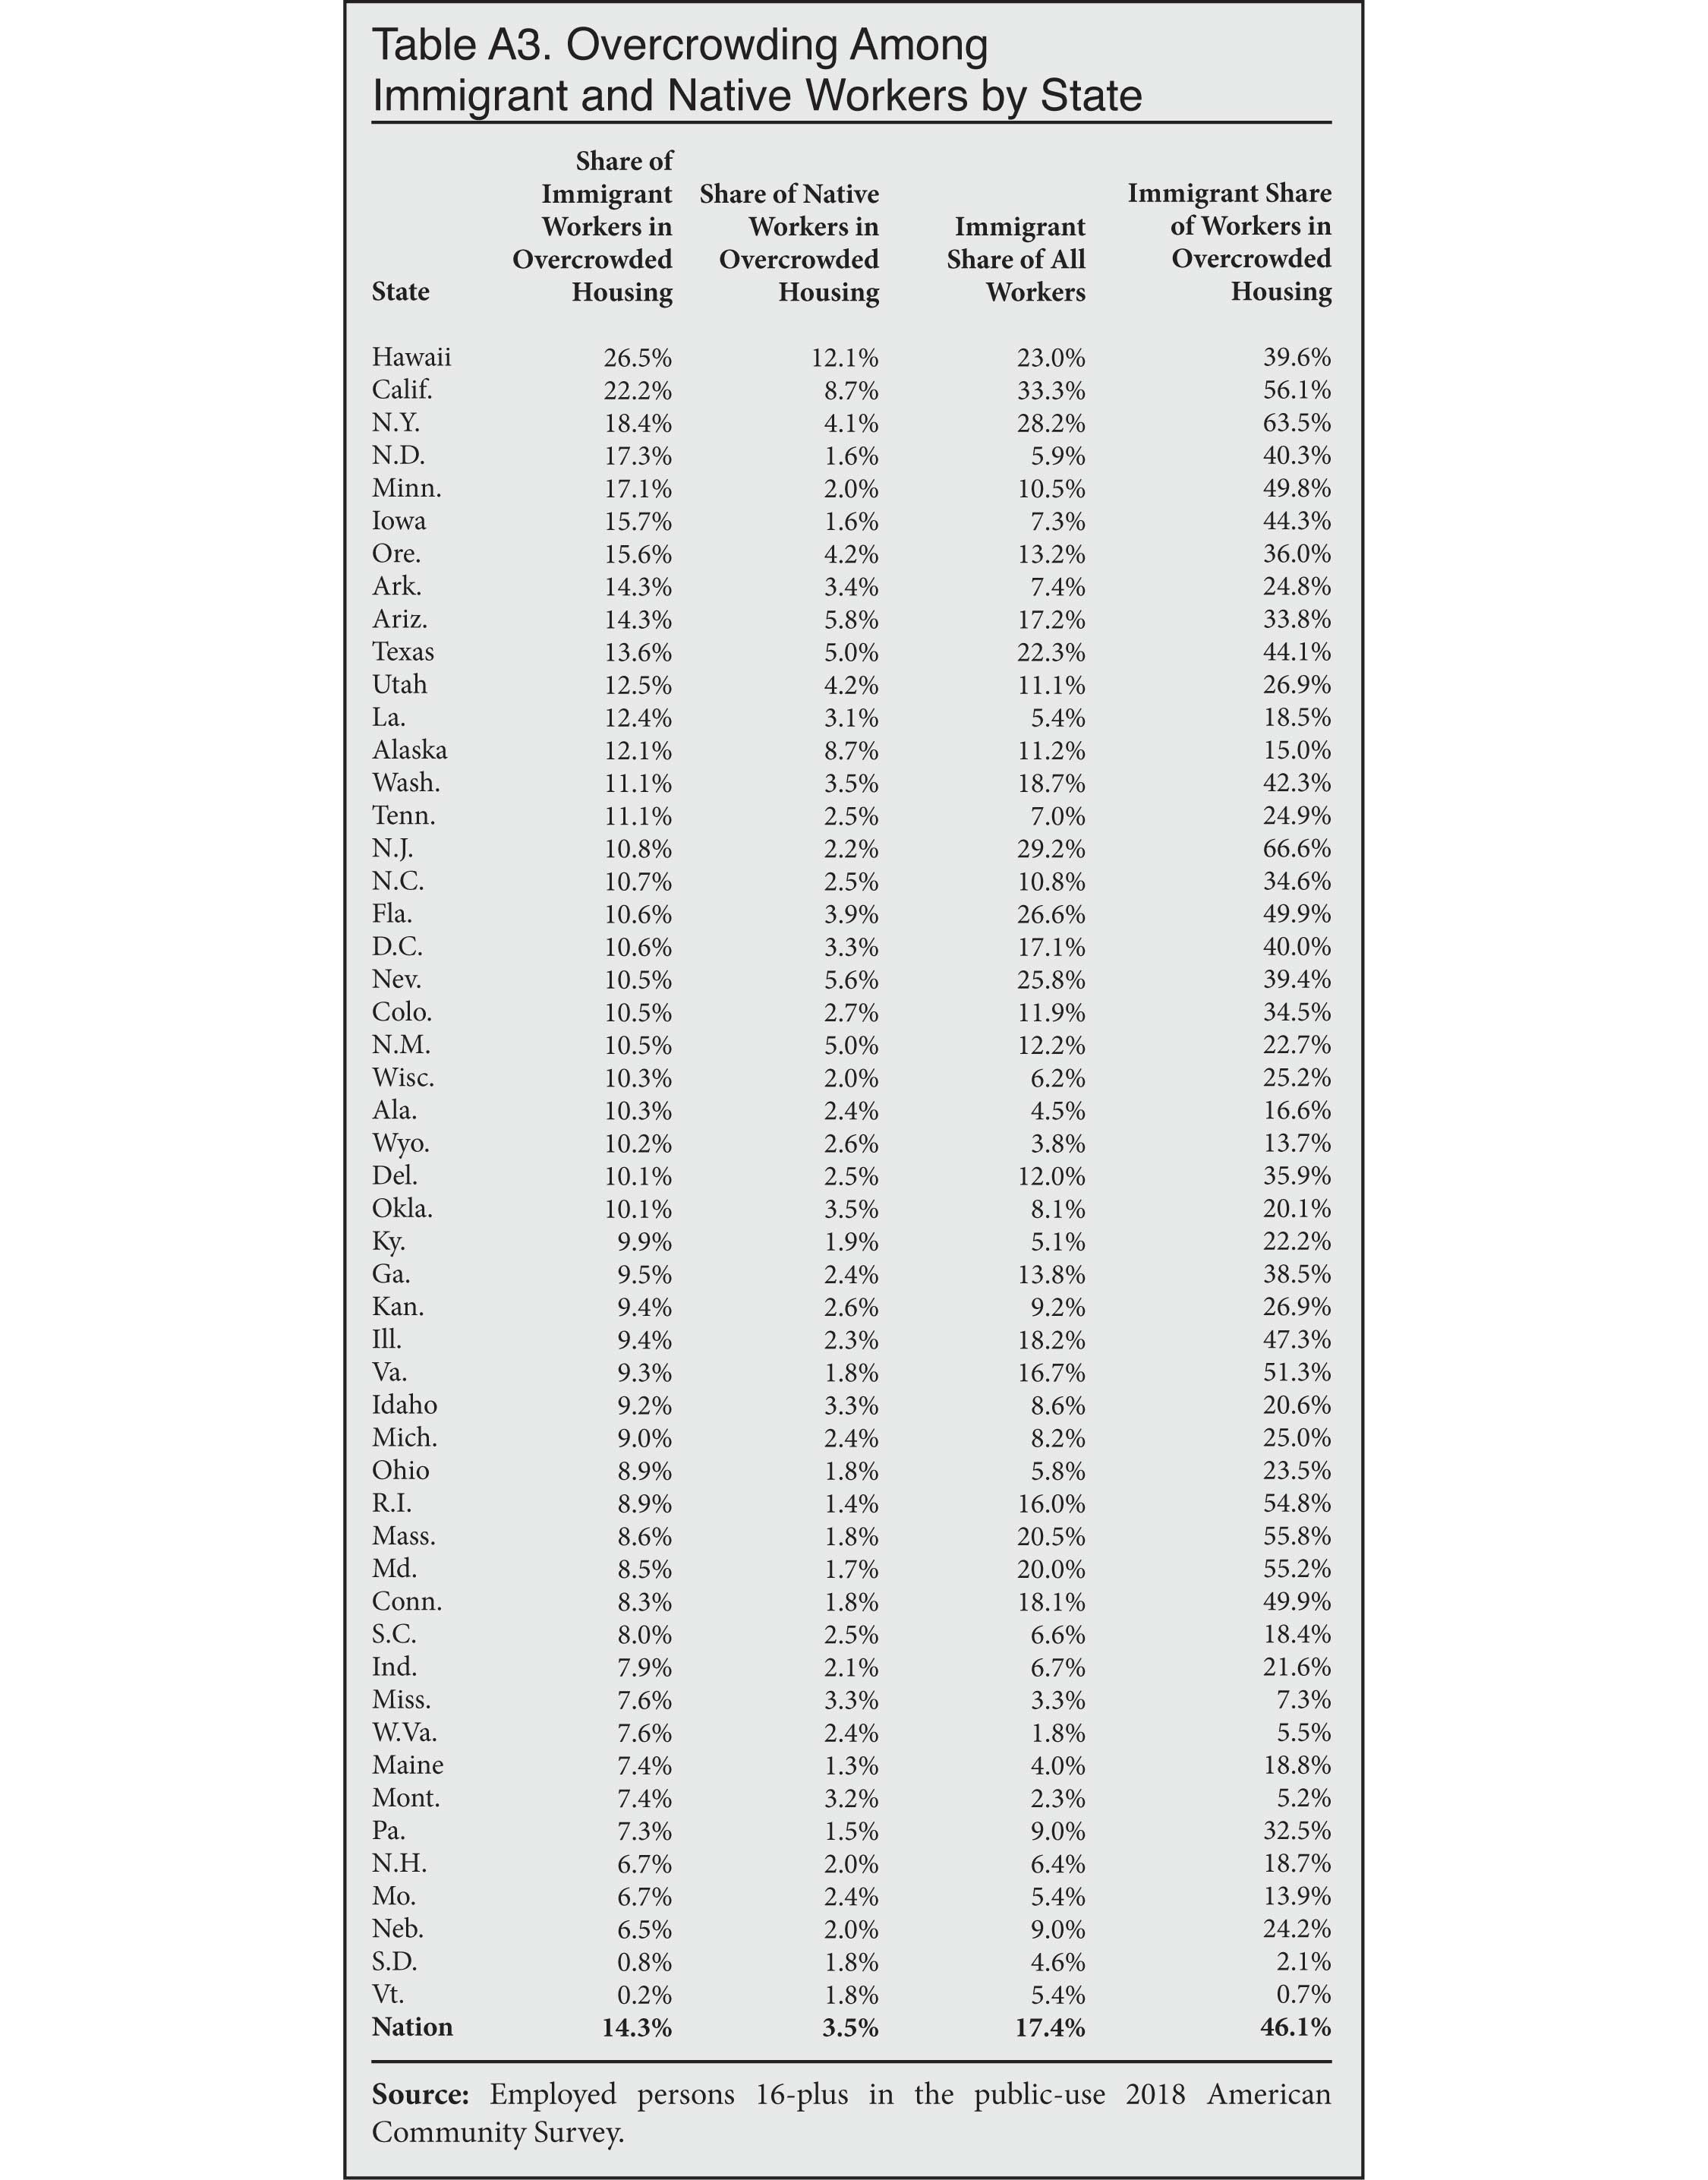 Table: Overcrowding among immigrant and native born workers by state